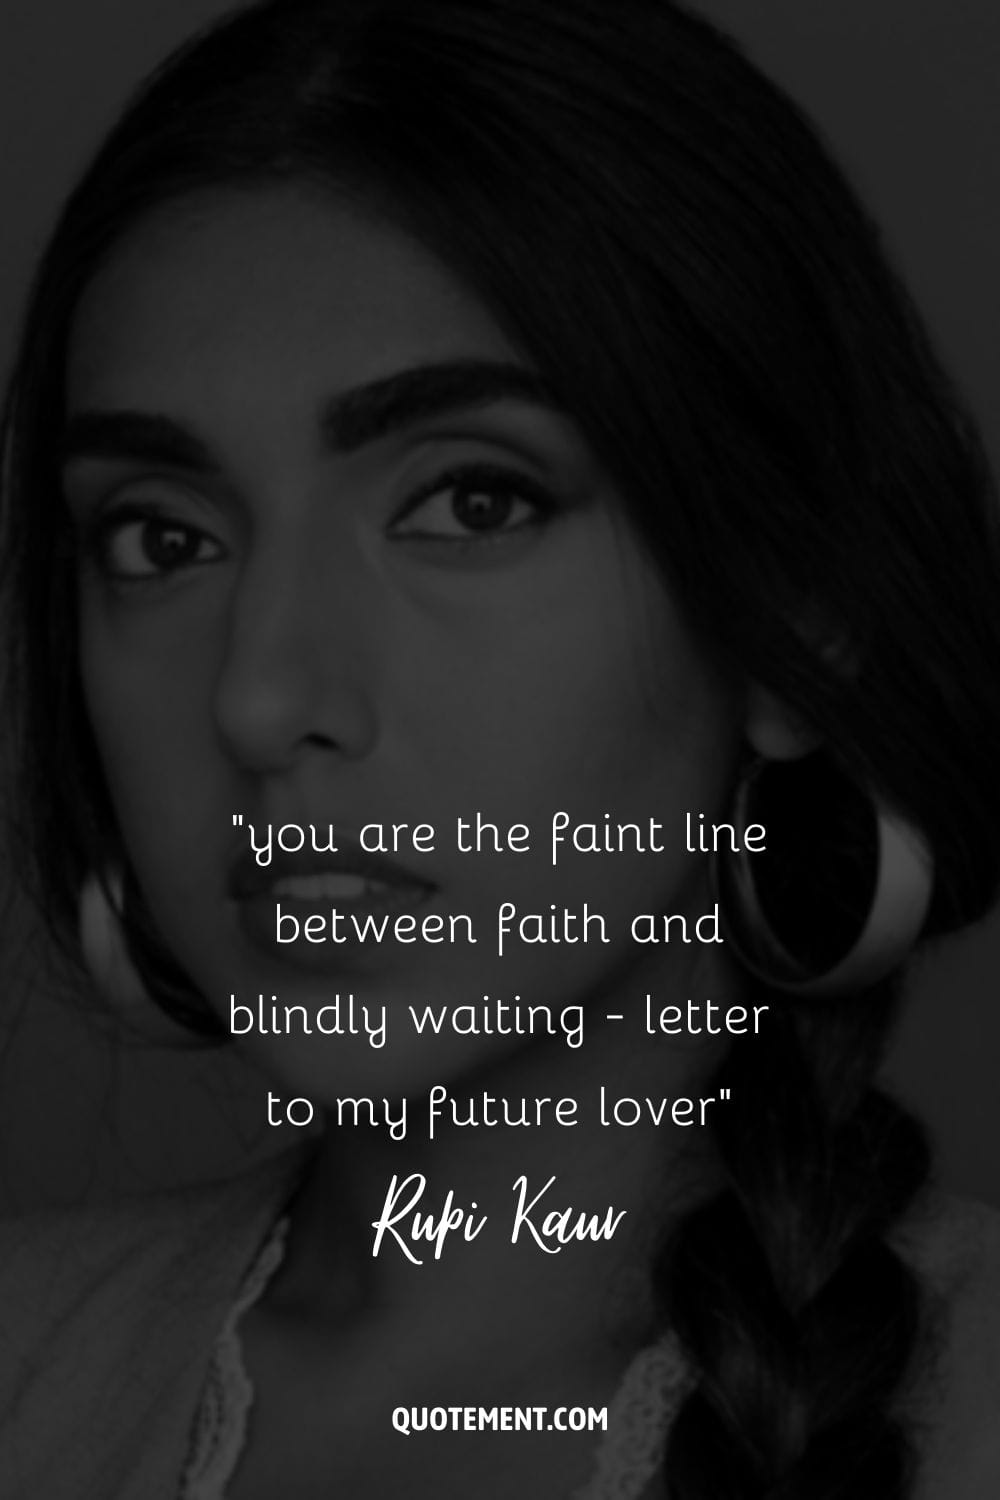 you are the faint line between faith and blindly waiting - letter to my future lover